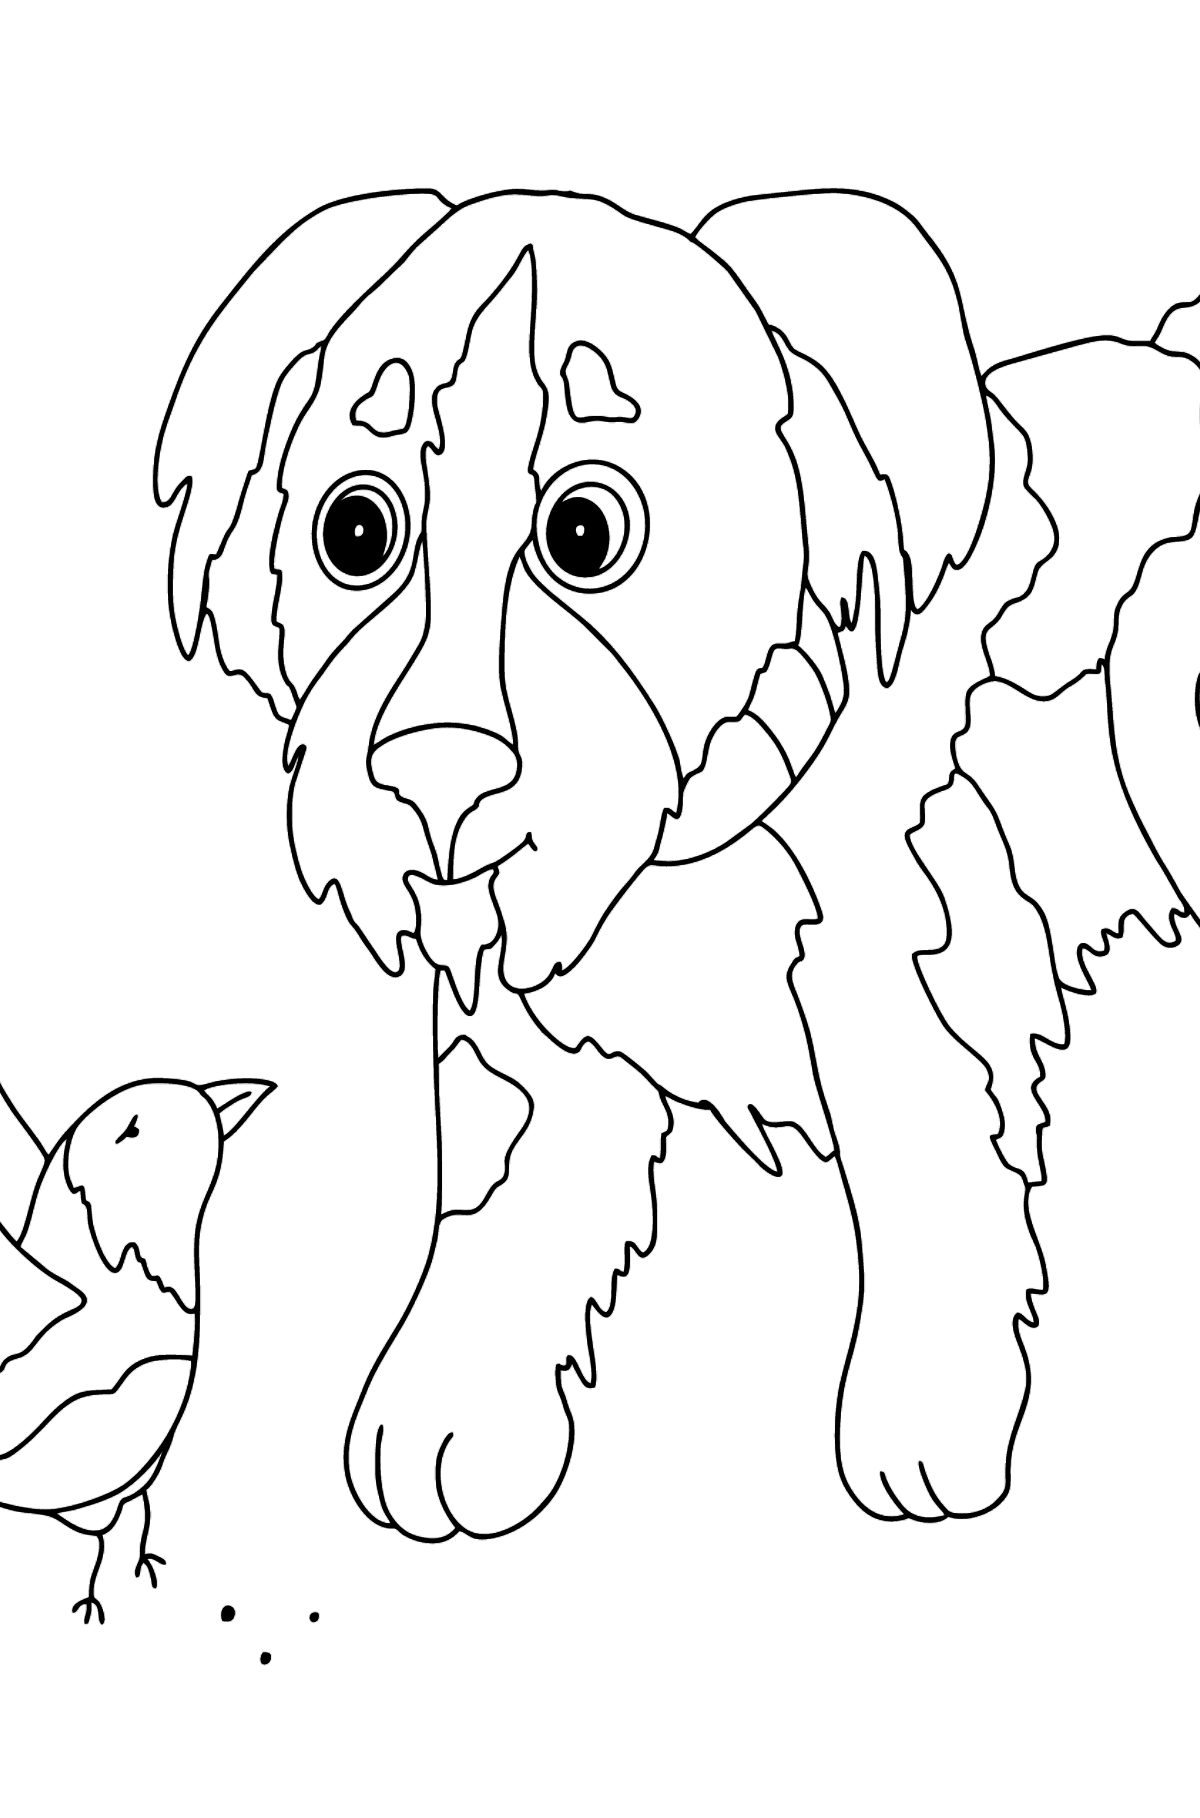 Coloring Page - A Dog is Playing with a Bird - Coloring Pages for Kids